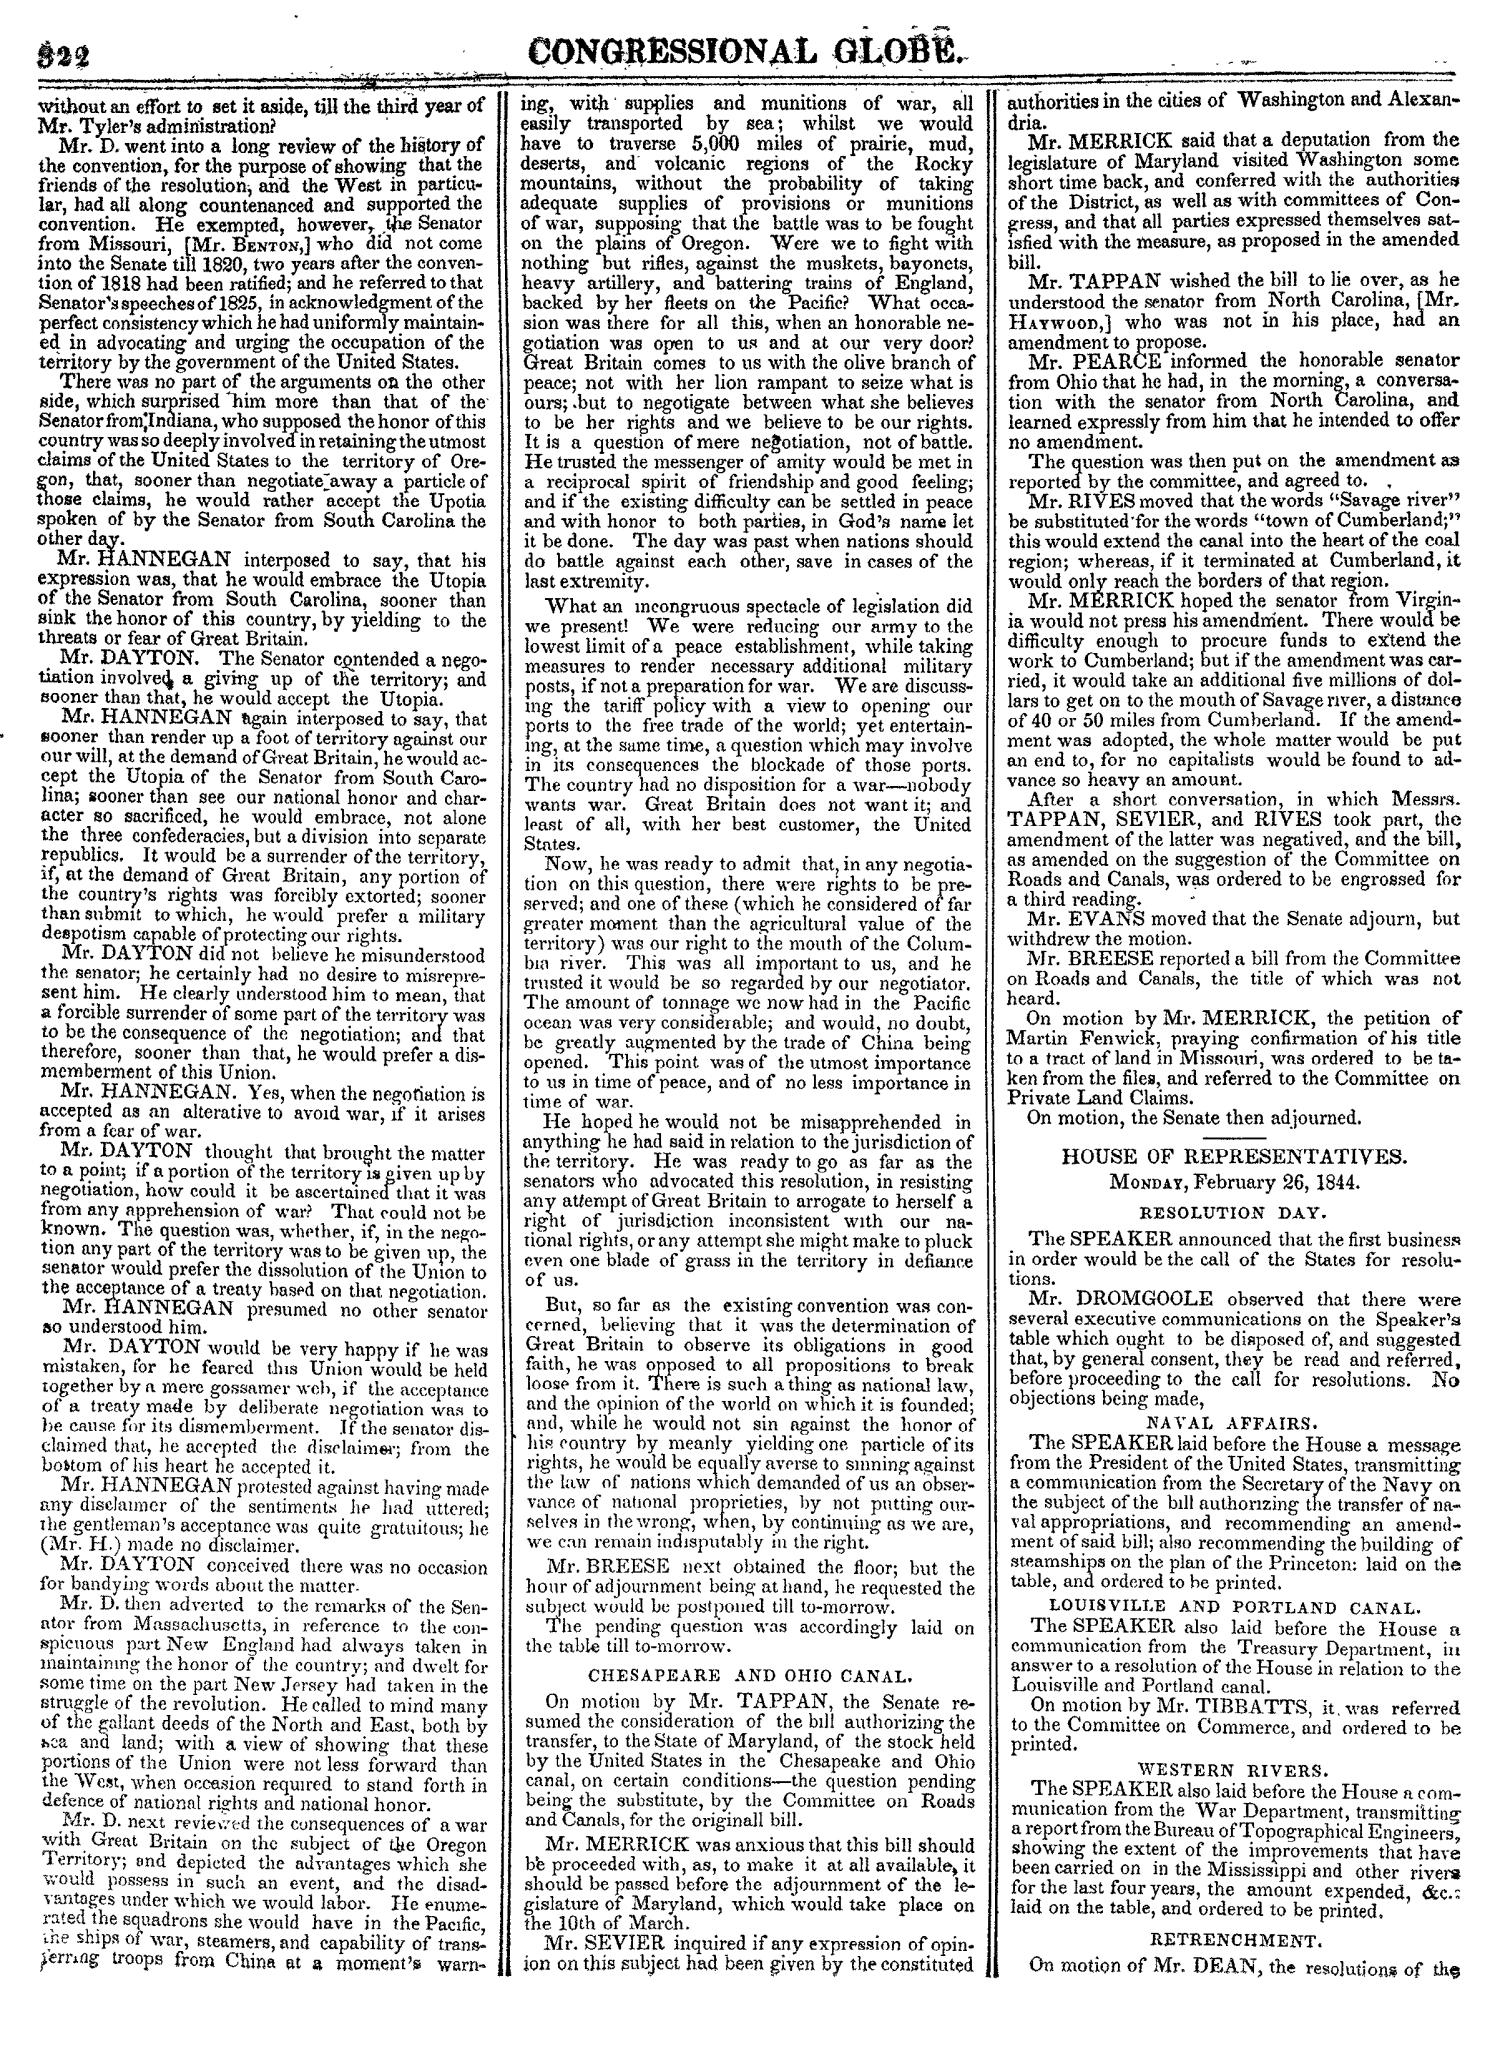 The Congressional Globe, Volume 13, Part 1: Twenty-Eighth Congress, First Session
                                                
                                                    322
                                                